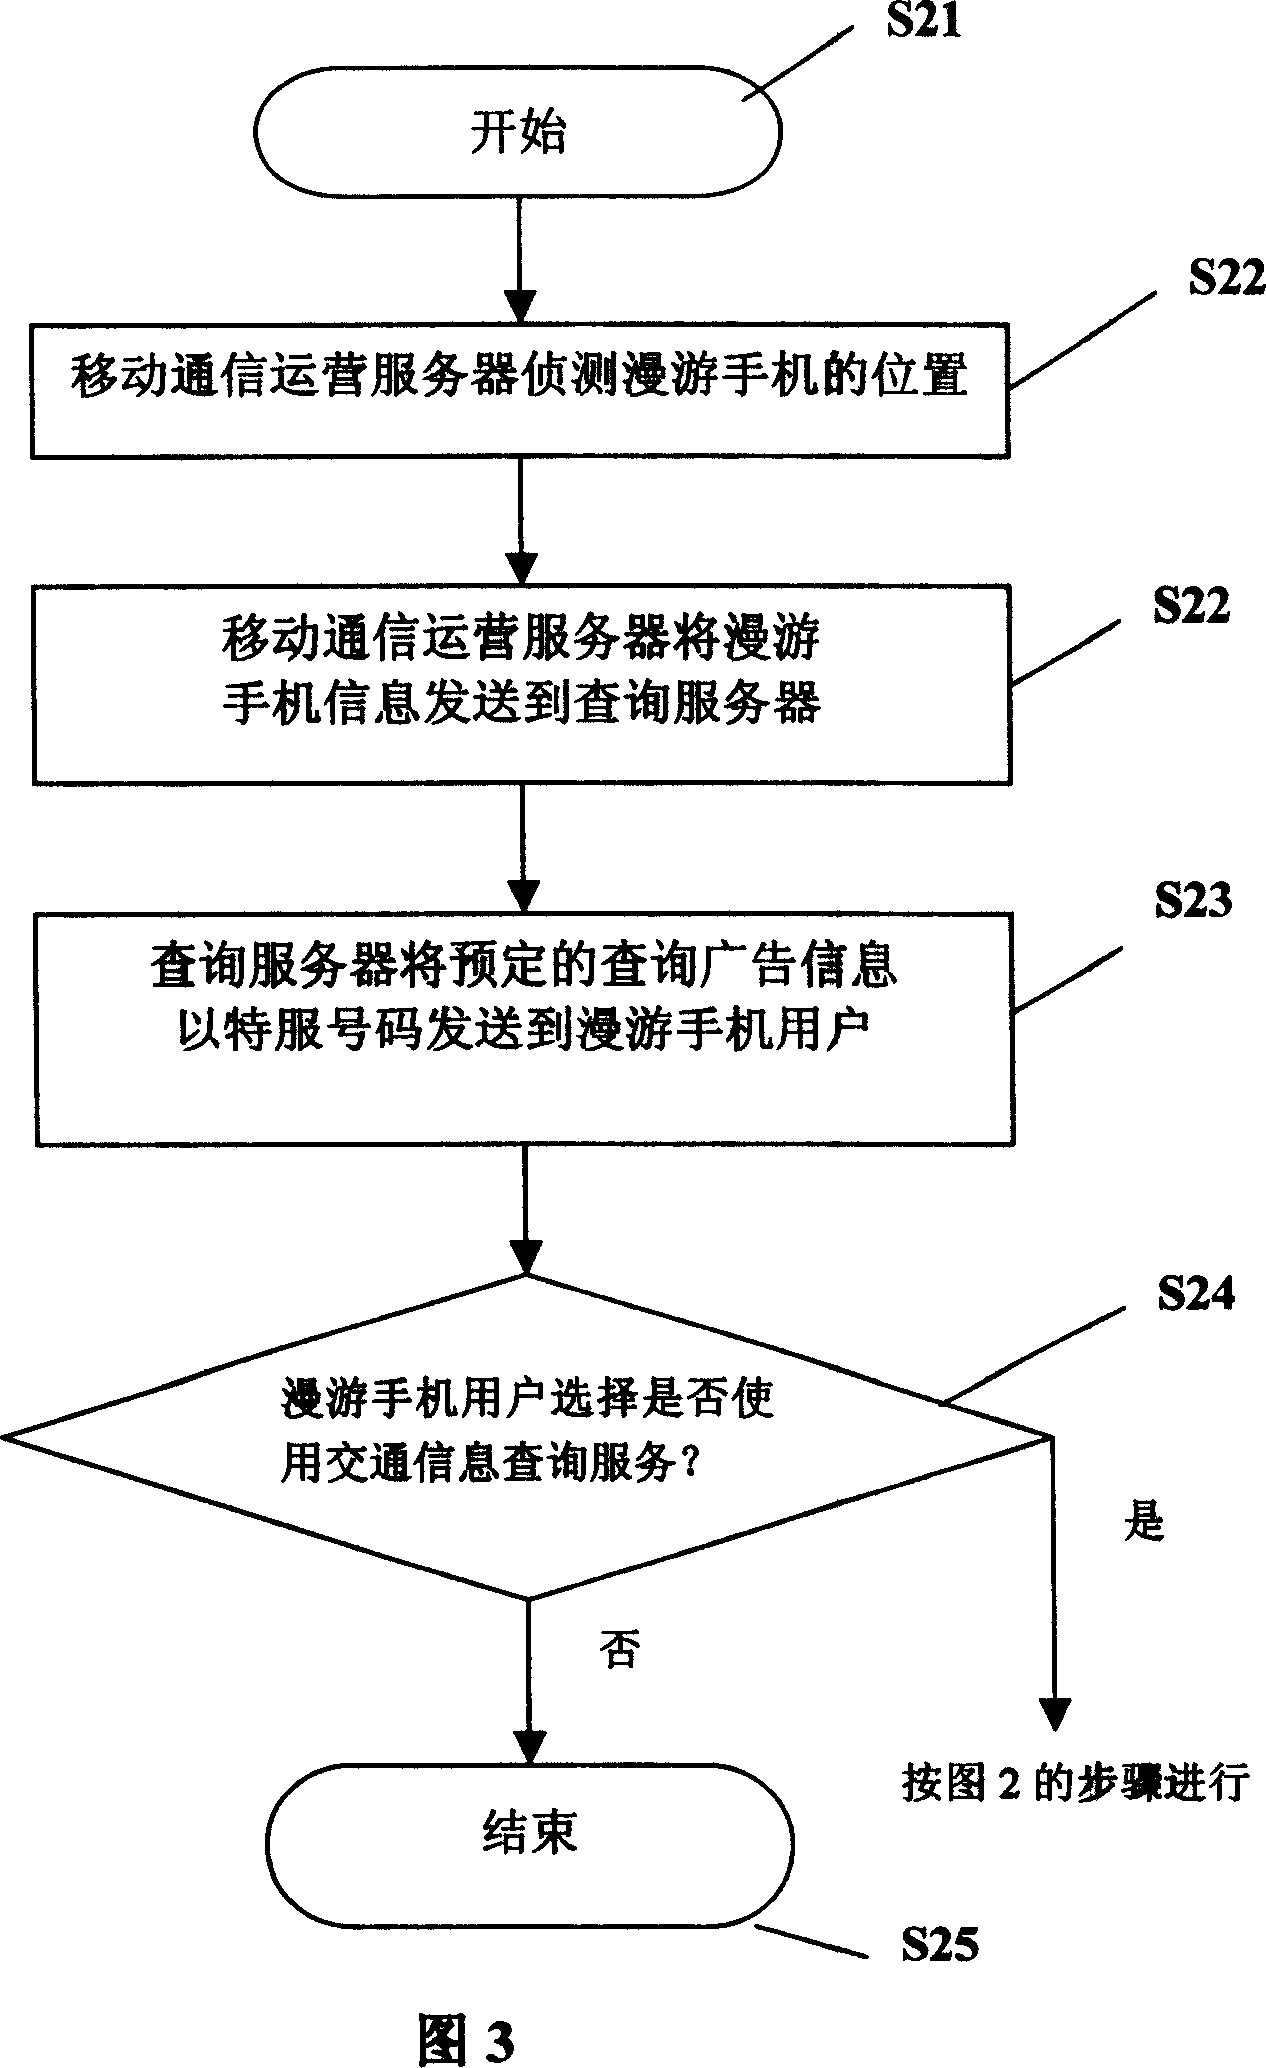 Traffic information query system and method based on cellphone network